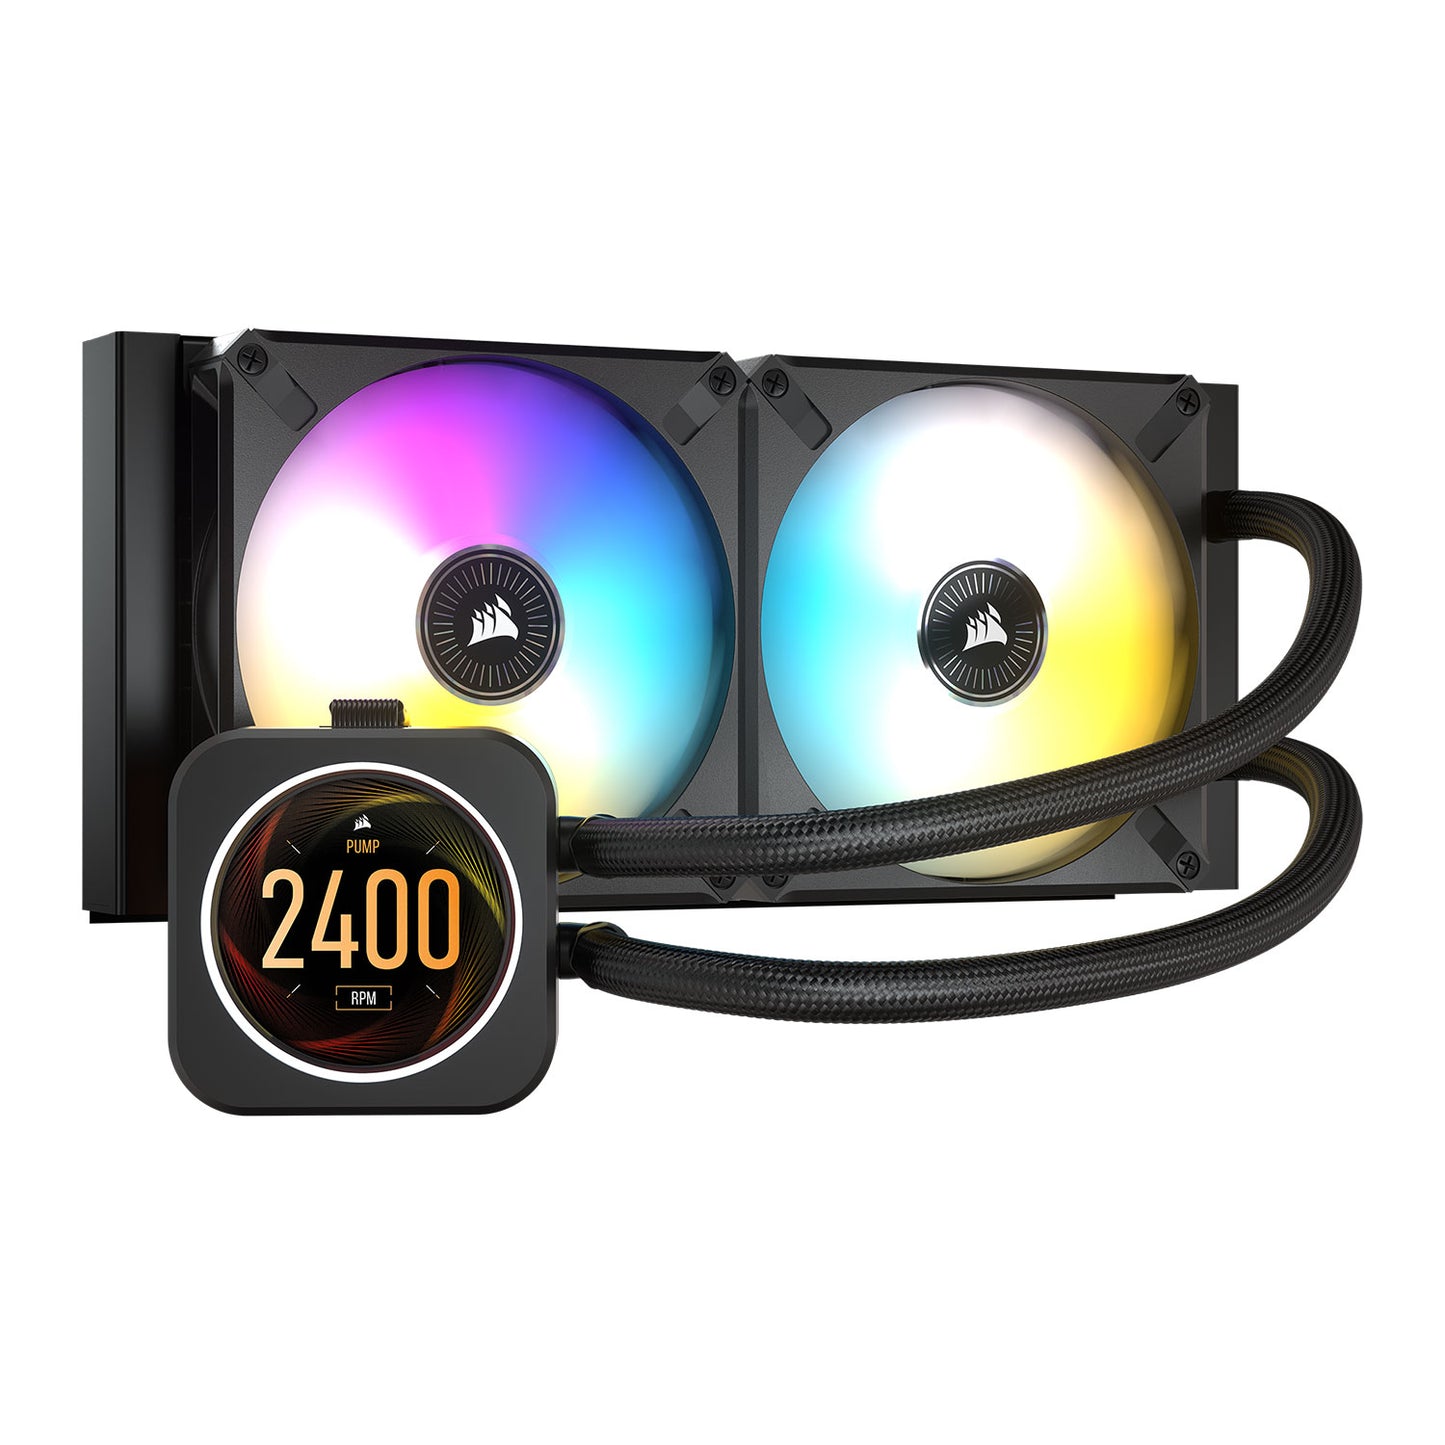 Corsair iCUE H100i ELITE LCD 240mm Intel/AMD PC CPU Liquid Cooler With 2.1" LCD Display CW-9060061-WW